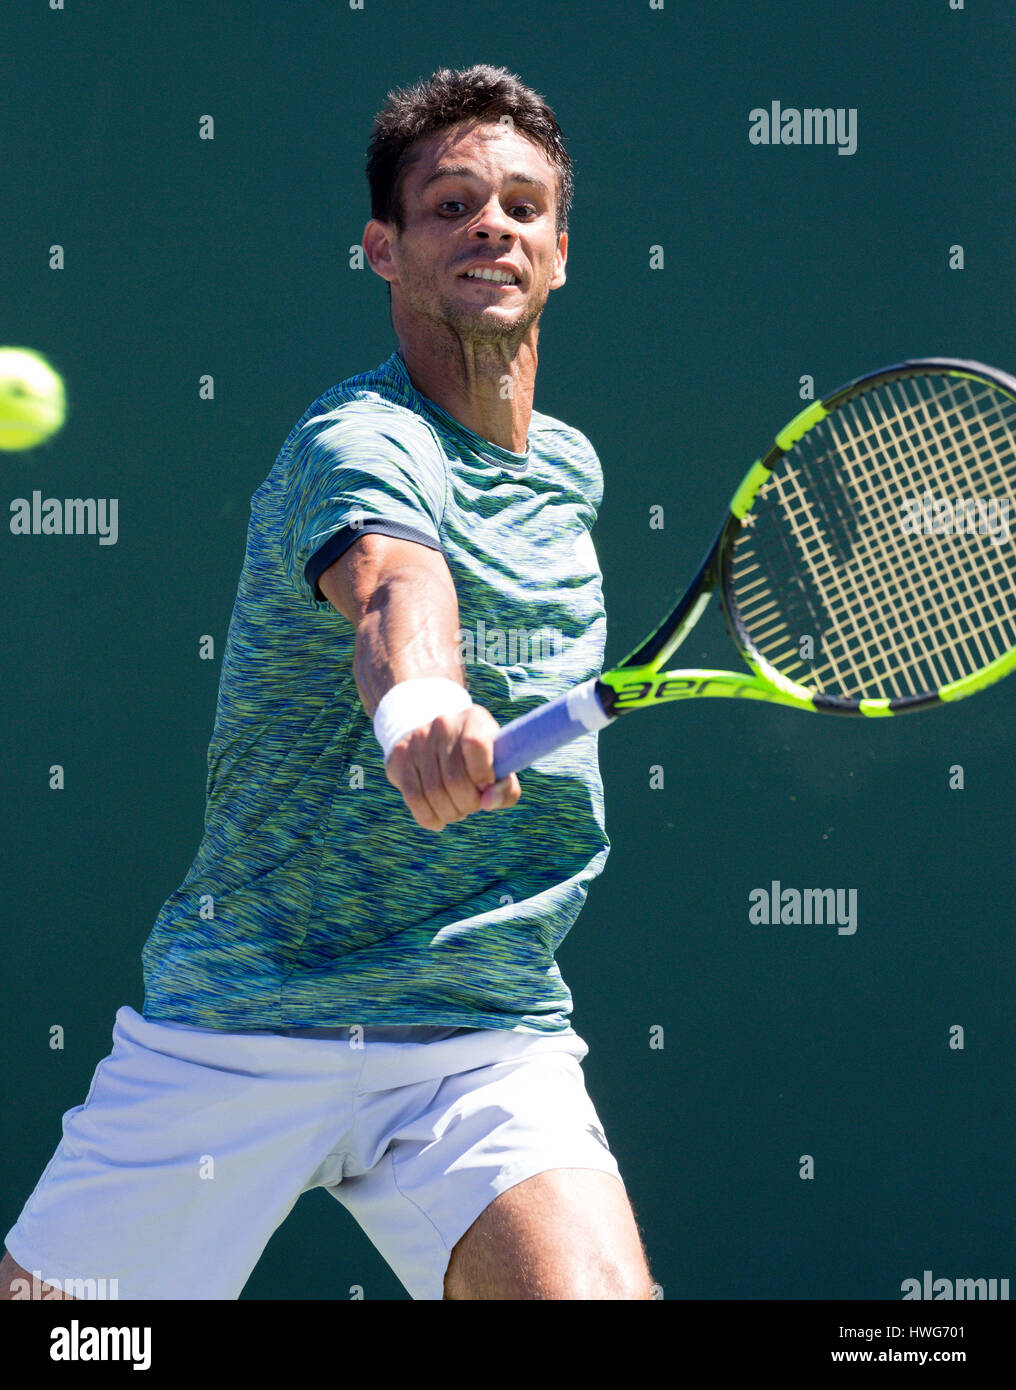 Key Biscayne, Florida, USA. 21st Mar, 2017. Rogerio Dutra Silva, from Brazil, plays a backhand against Christian Harrison, of the United States, at the 2017 Miami Open presented by Itau professional tennis tournament, played at Crandon Park Tennis Center in Key Biscayne, Florida, USA. Mario Houben/CSM/Alamy Live News Stock Photo